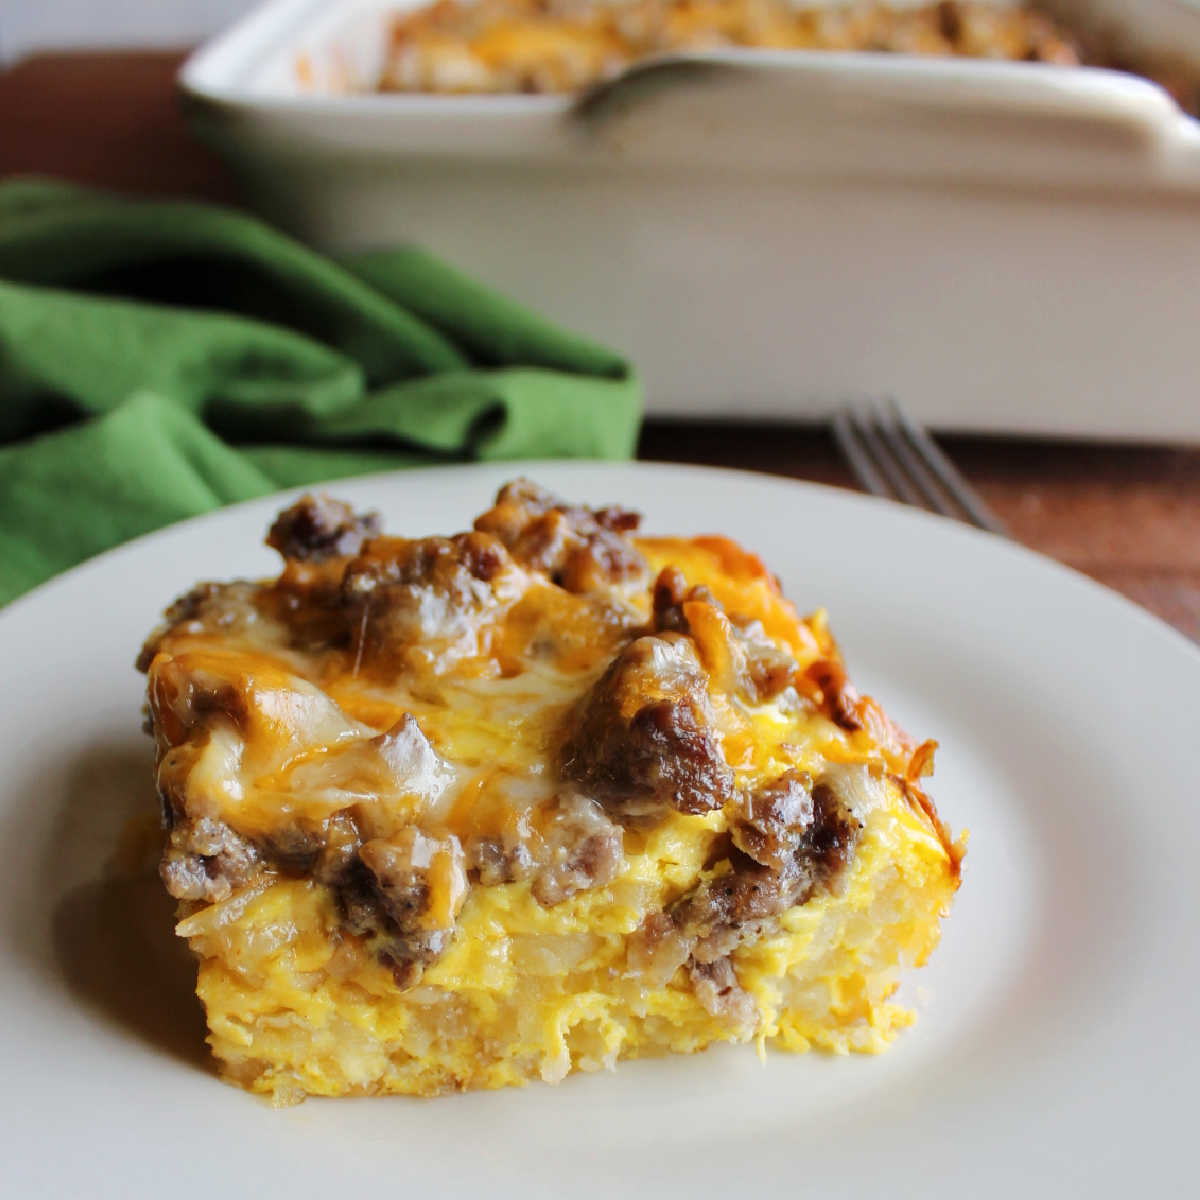 Piece of hashbrown egg casserole with sausage and cheddar cheese ready to be eaten.